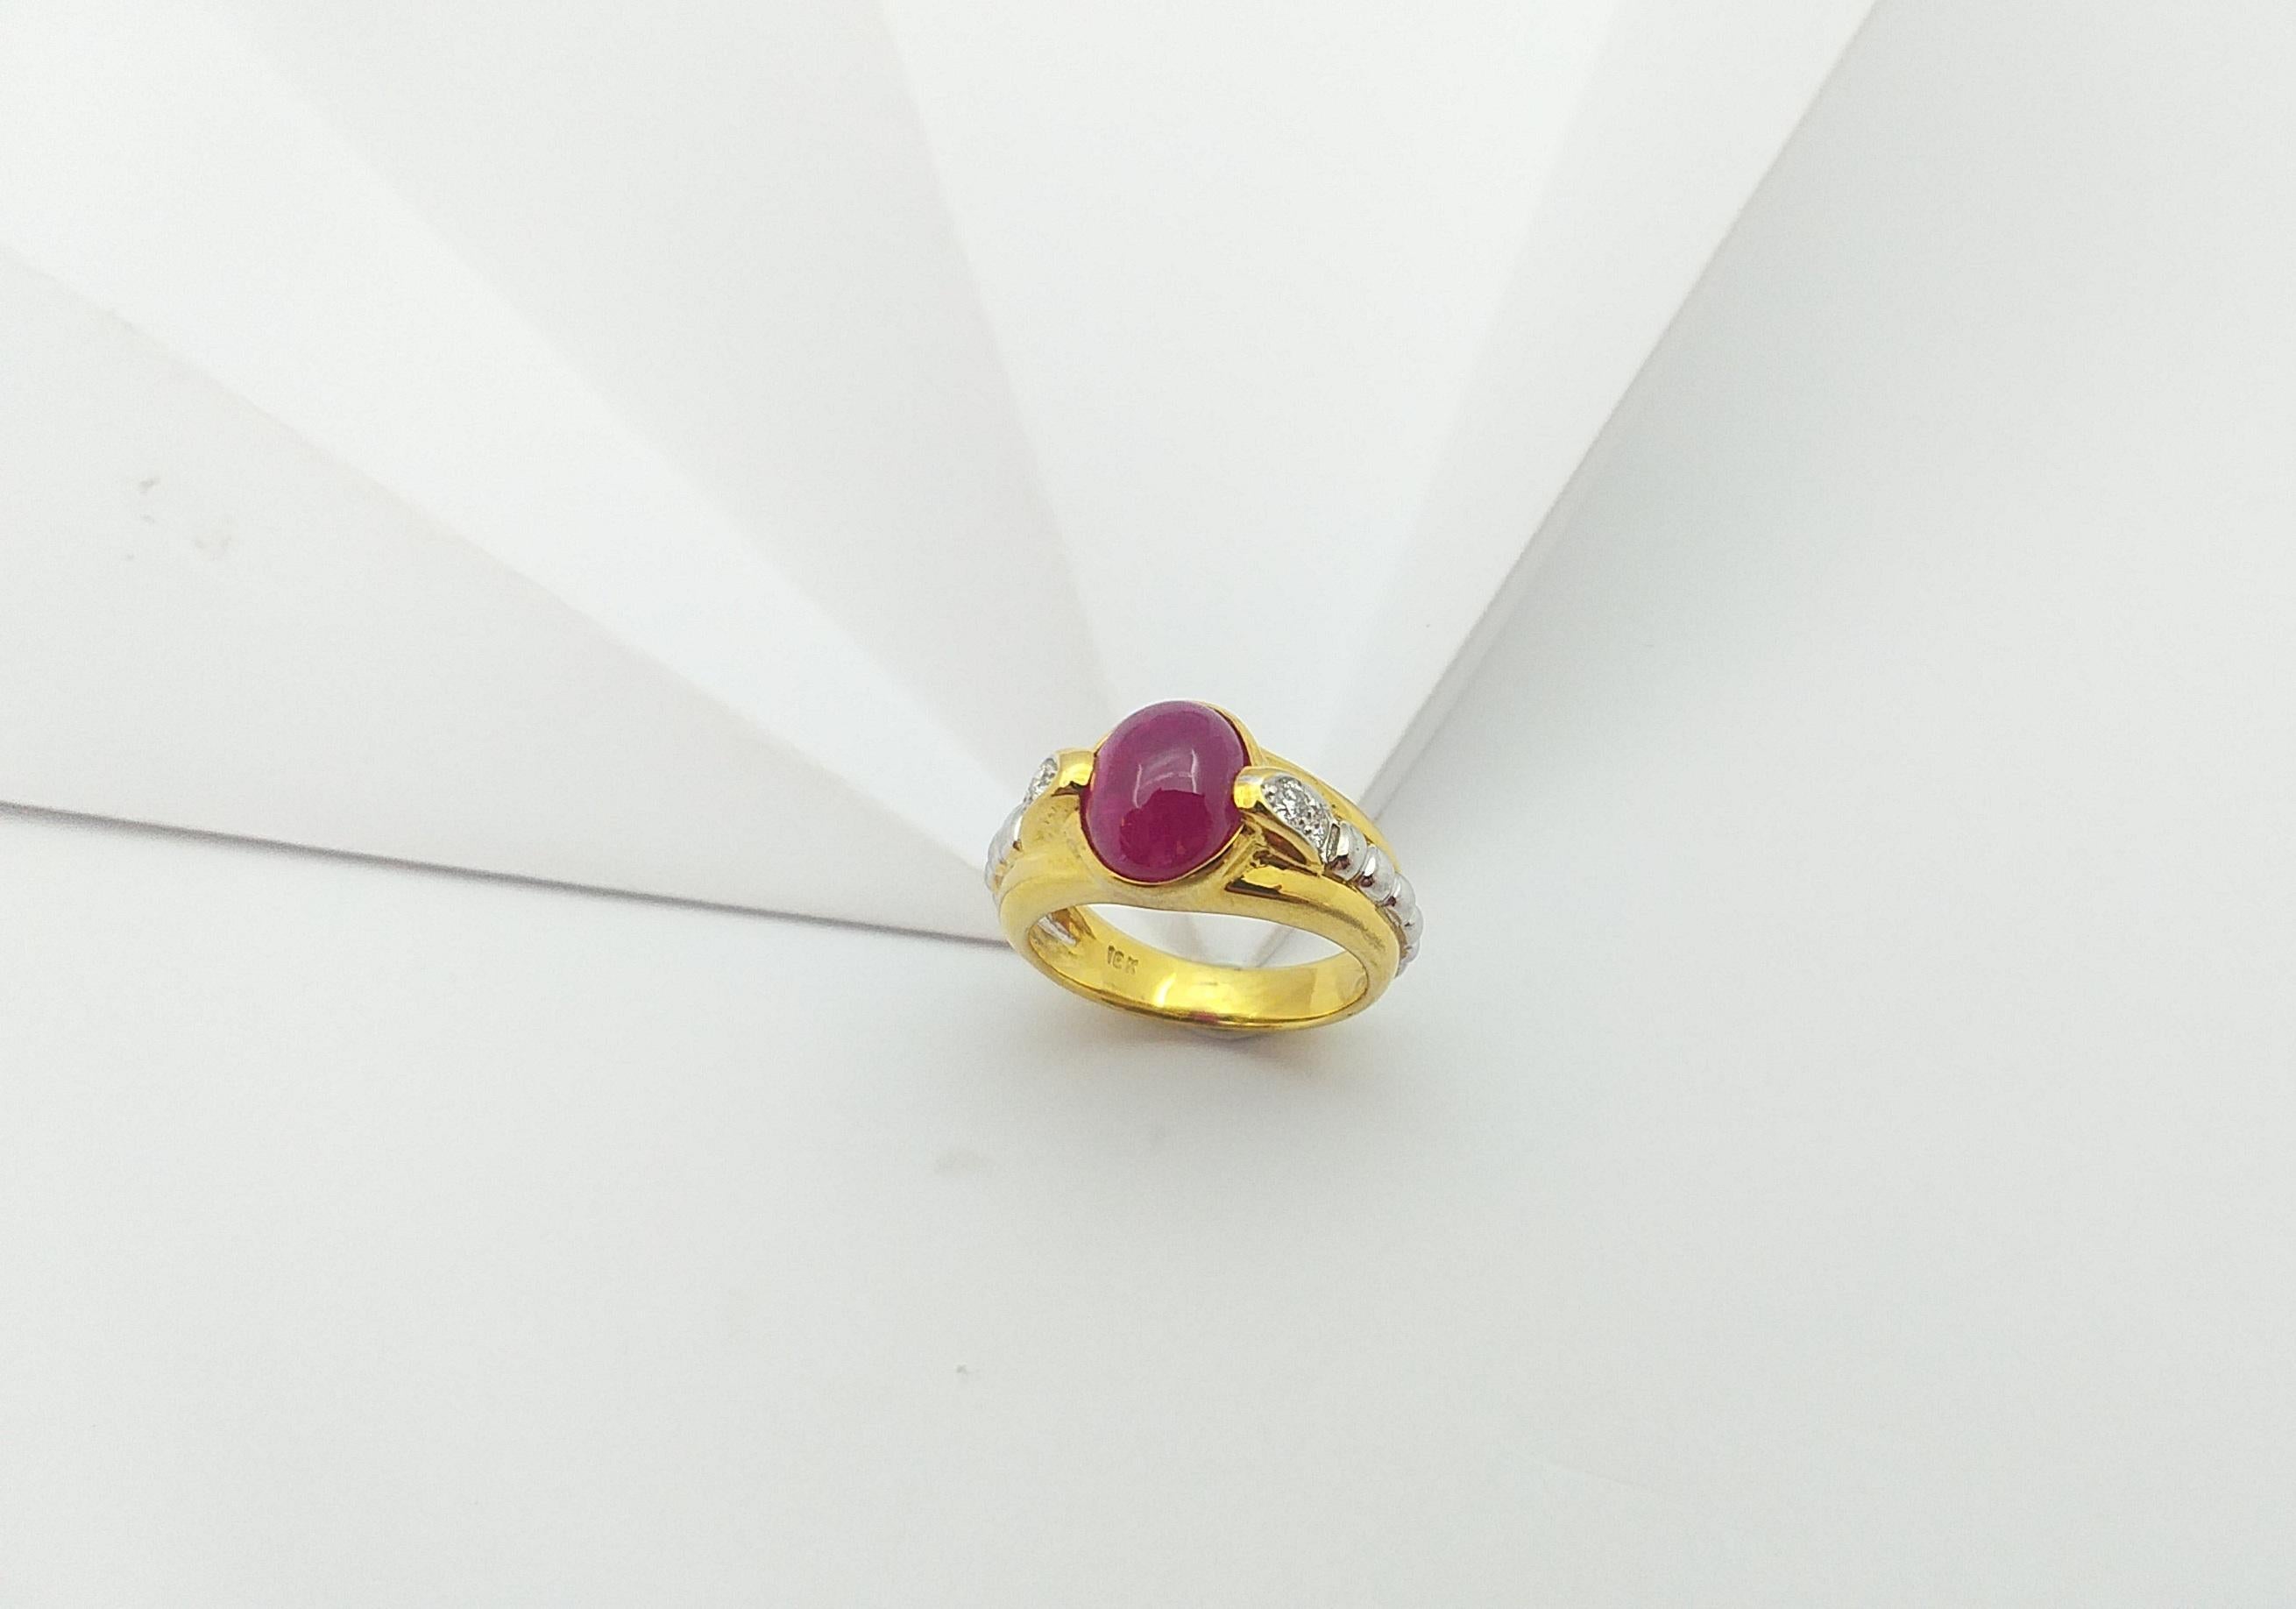 Cabochon Ruby with Diamond Ring Set in 18 Karat Gold Settings For Sale 8